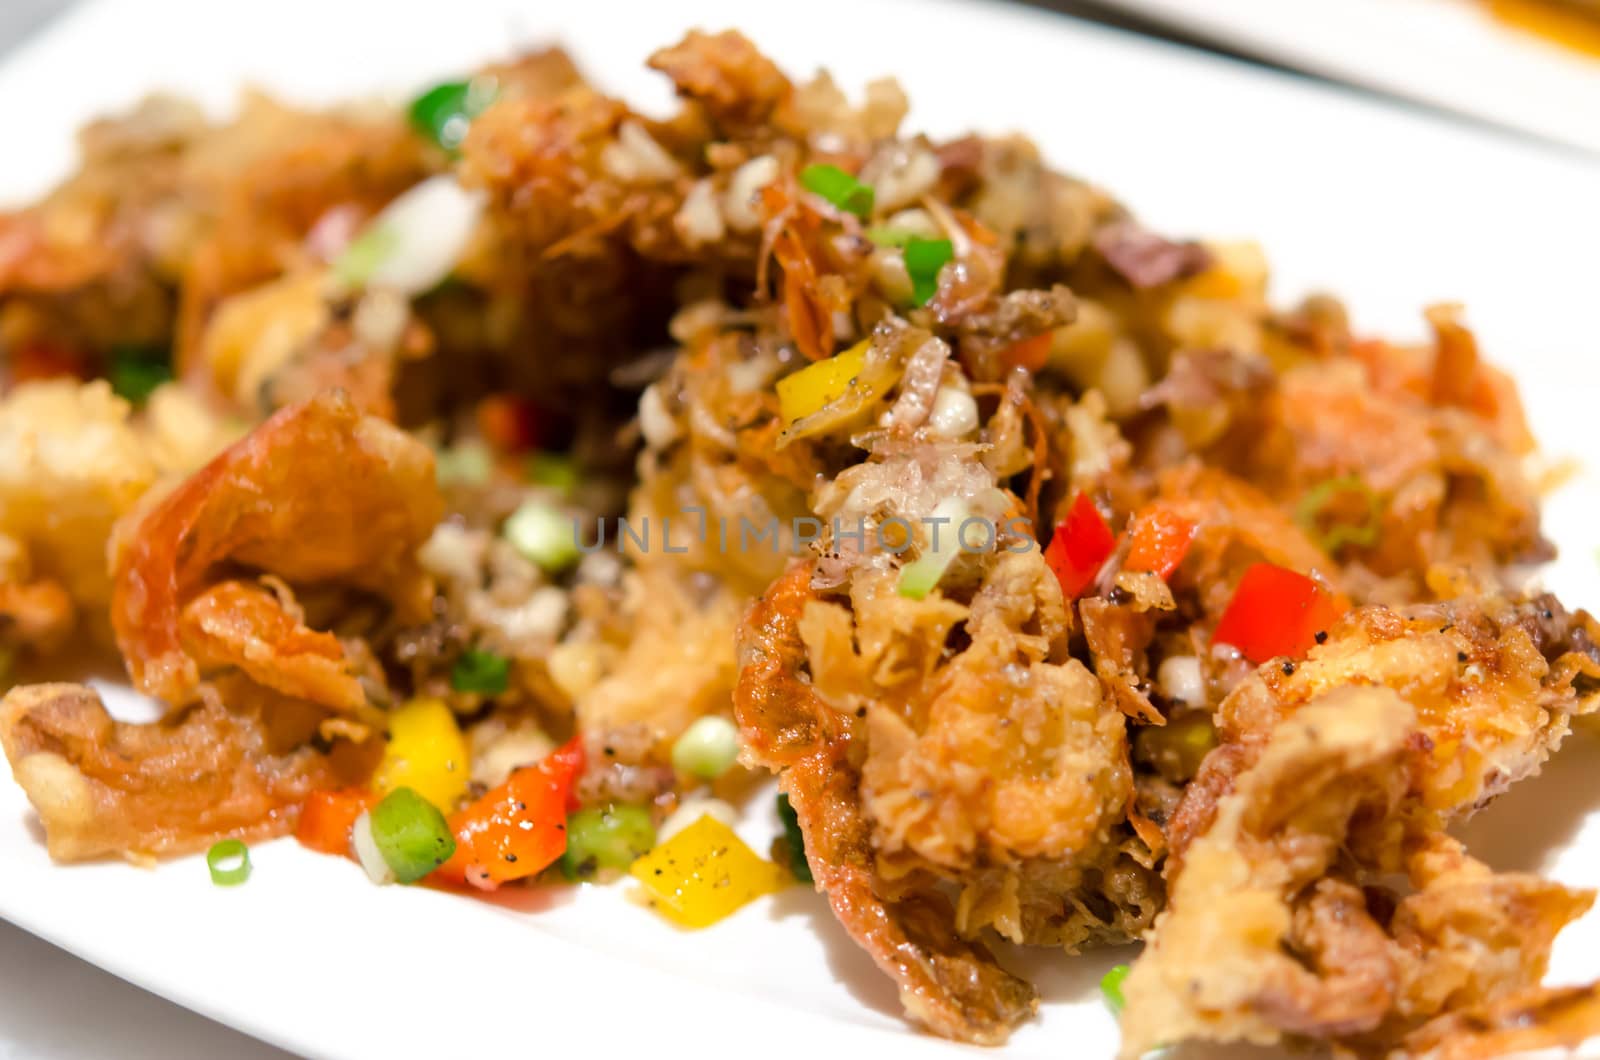 Deep fried soft shell crab on a white plate.